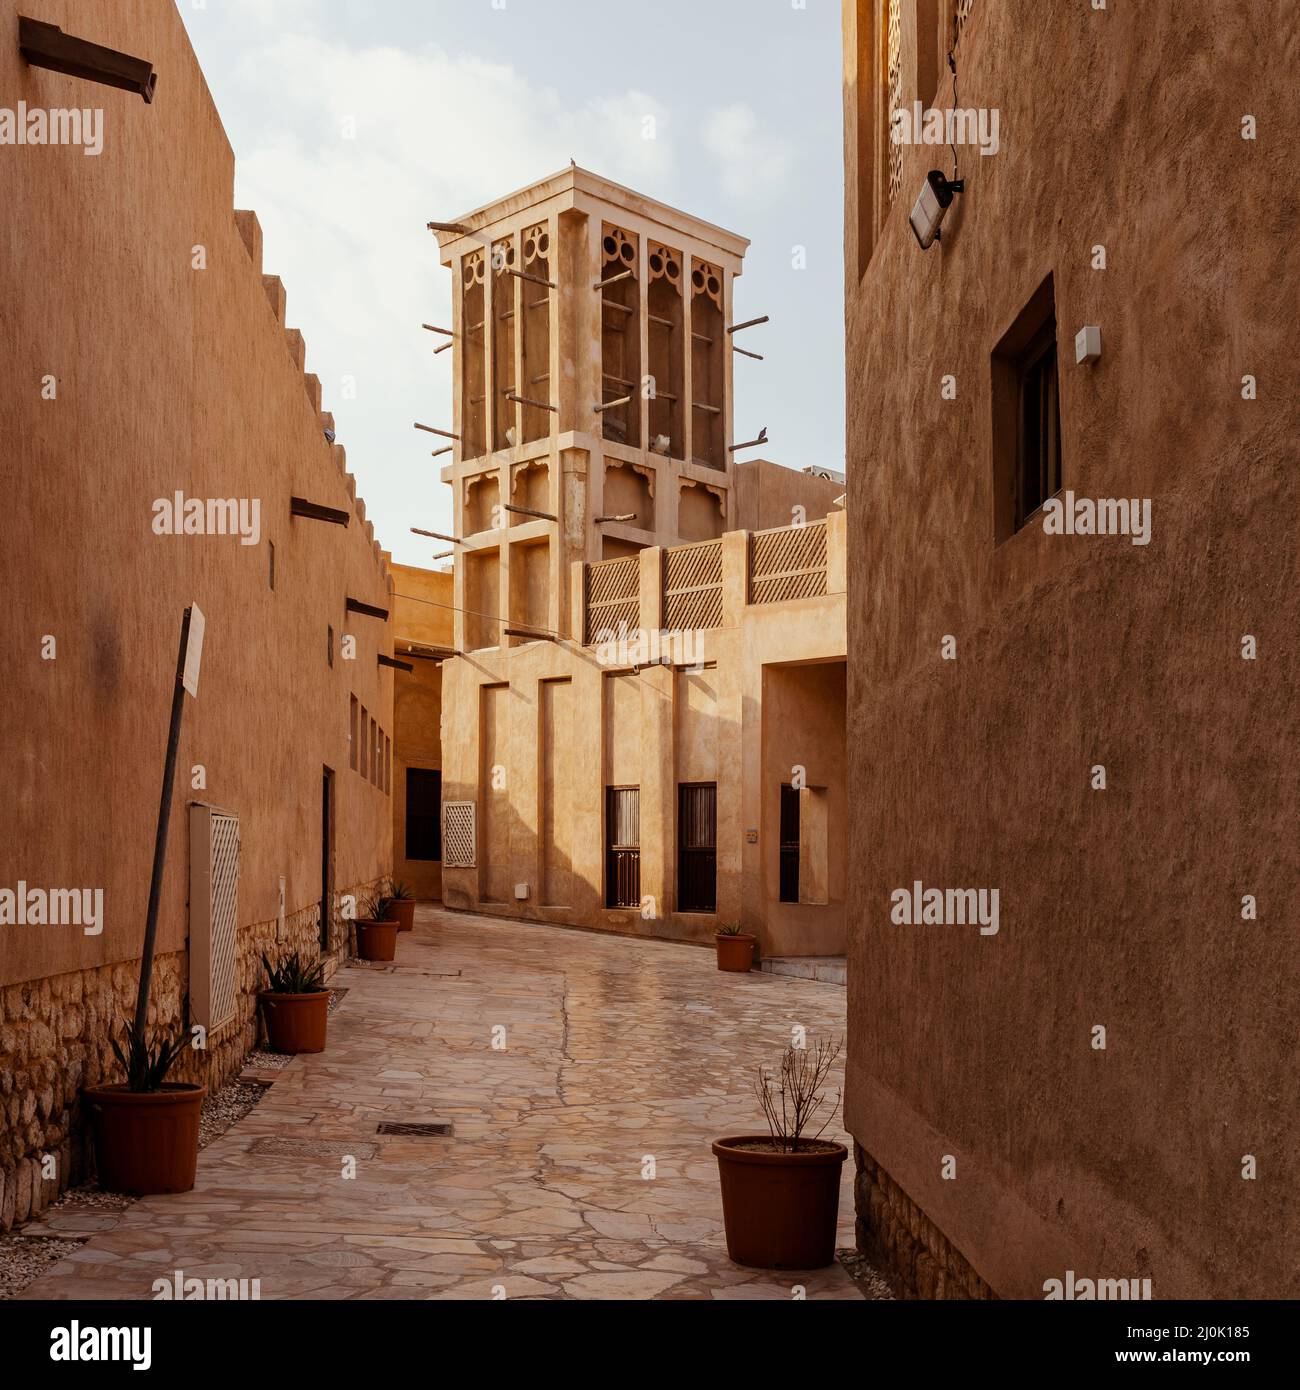 Al Seef Traditional Historical District Arabic Architecture. Dubai Deira Old Town. United Arab Emirates. Middle East. Stock Photo